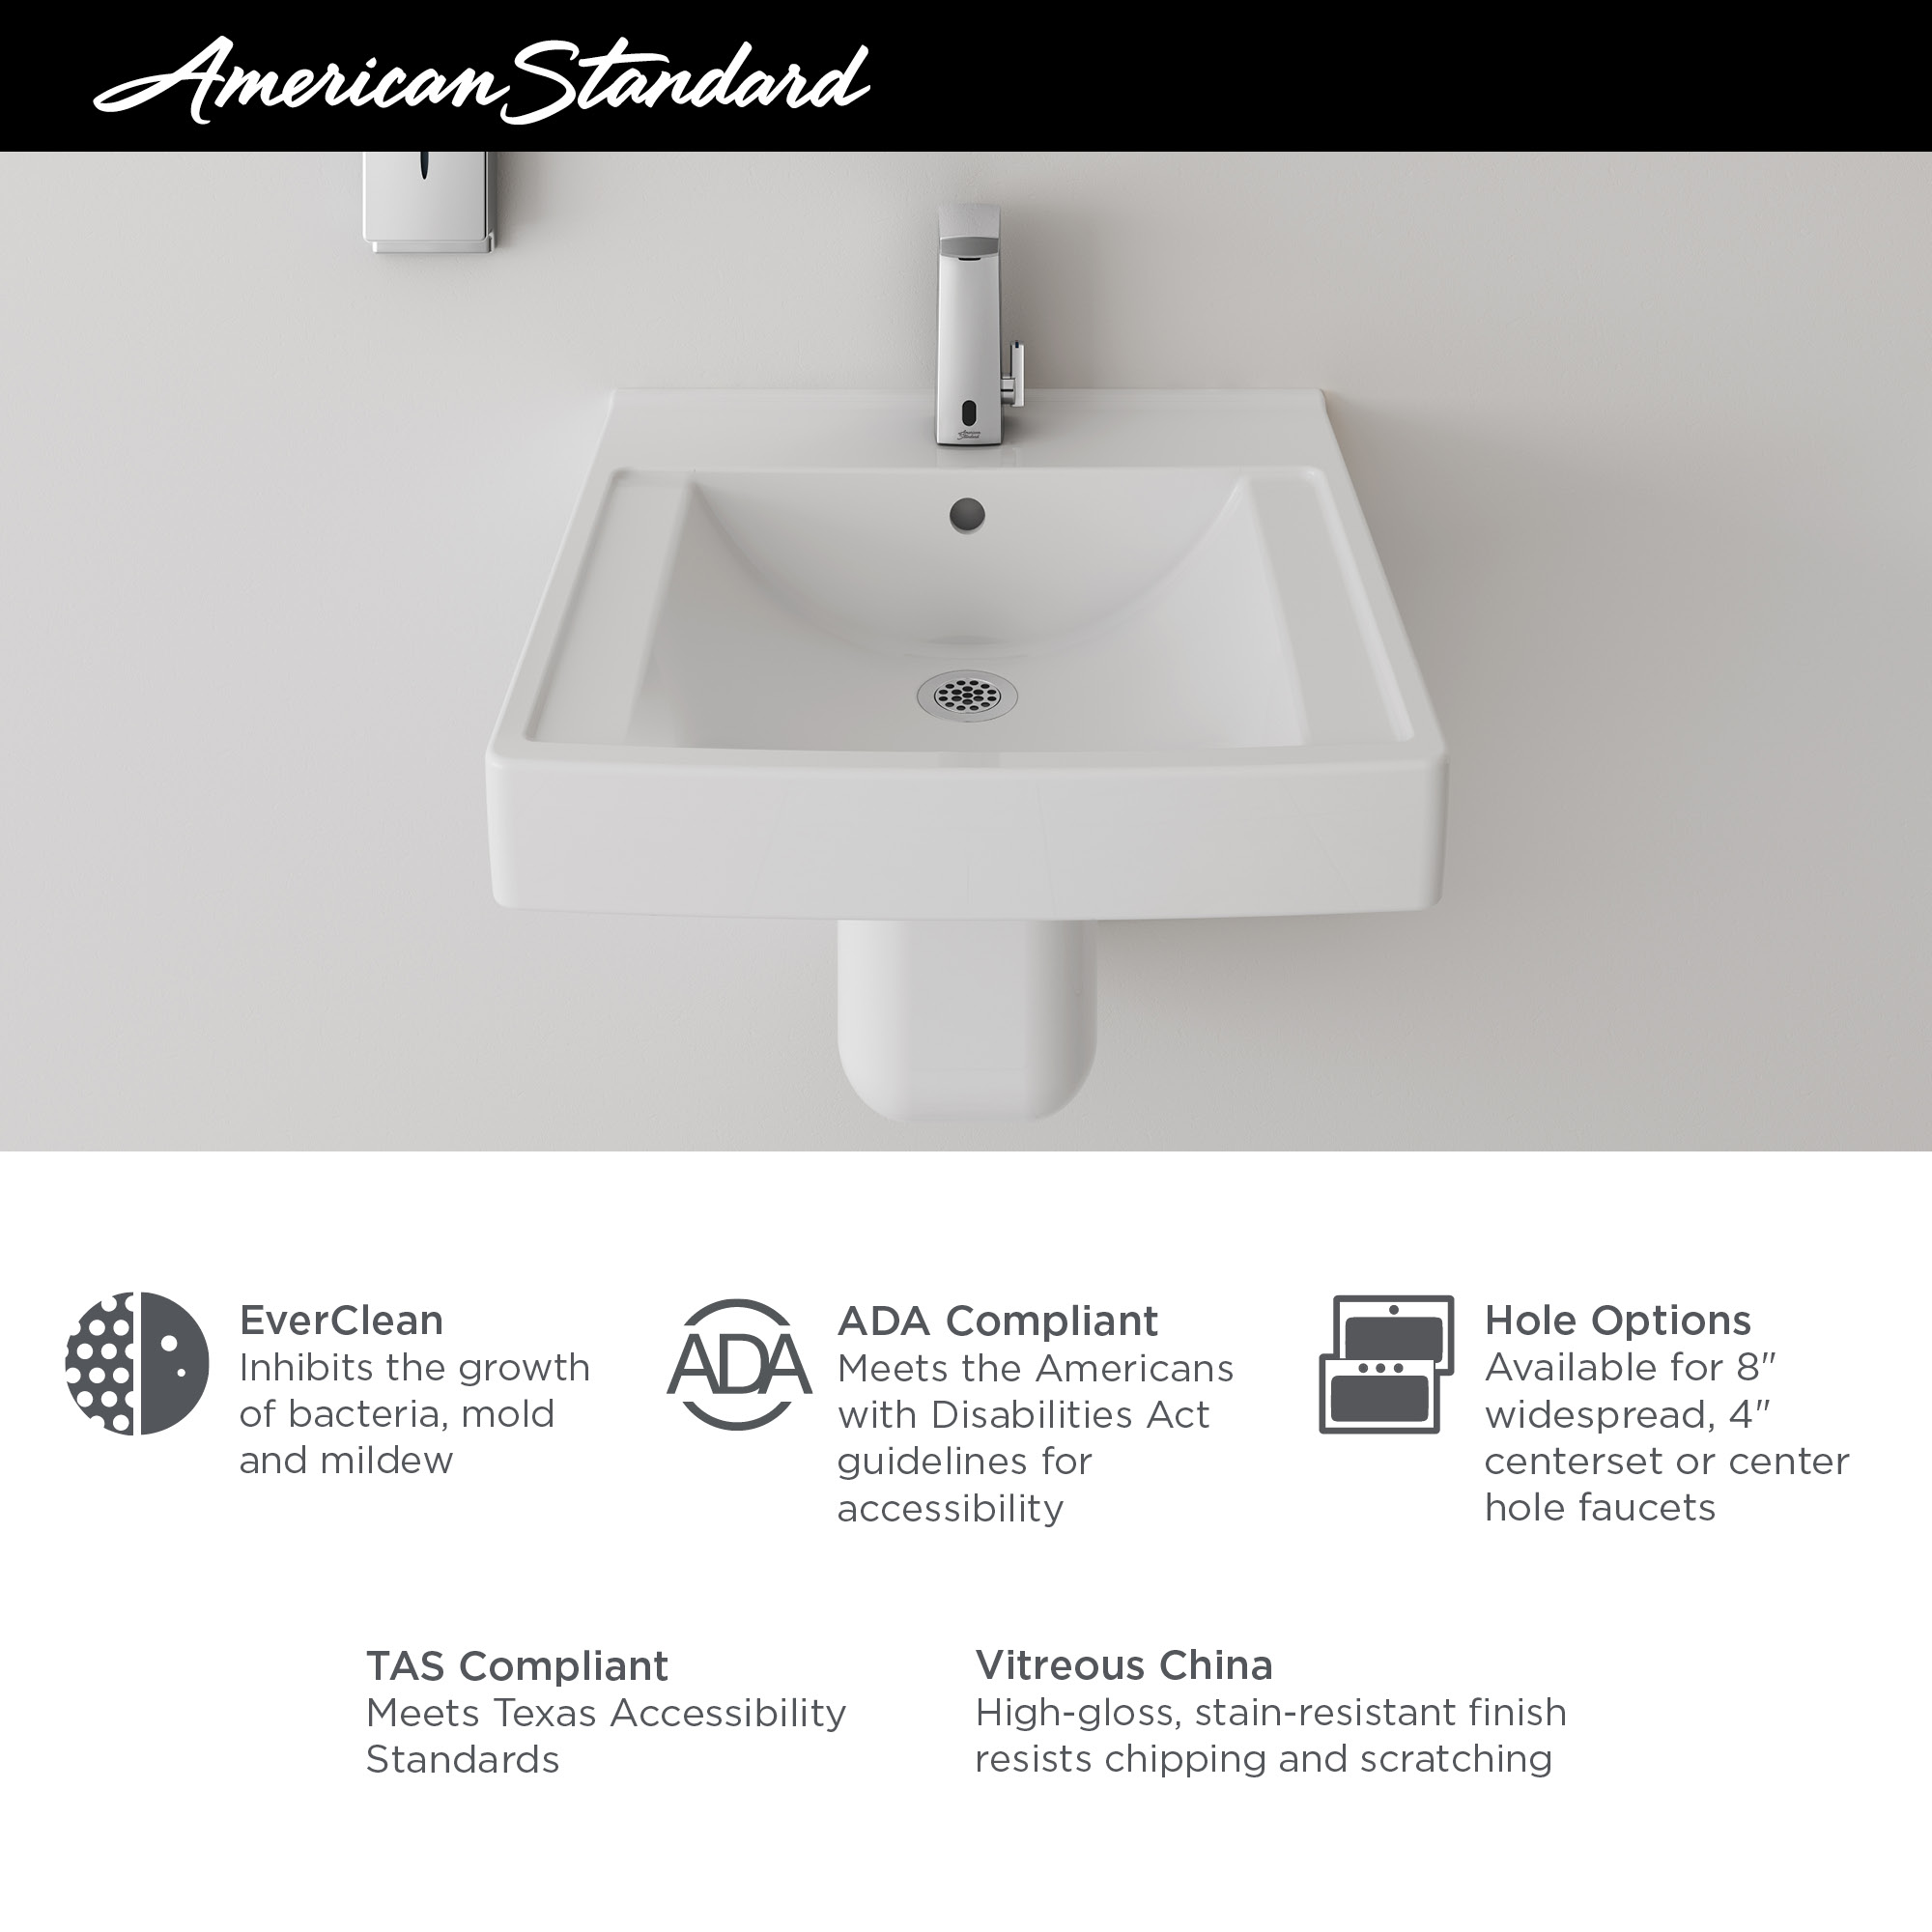 Decorum™ 21 x 20-1/4-Inch (533 x 514 mm) Wall-Hung EverClean™ Sink With 4-Inch Centerset